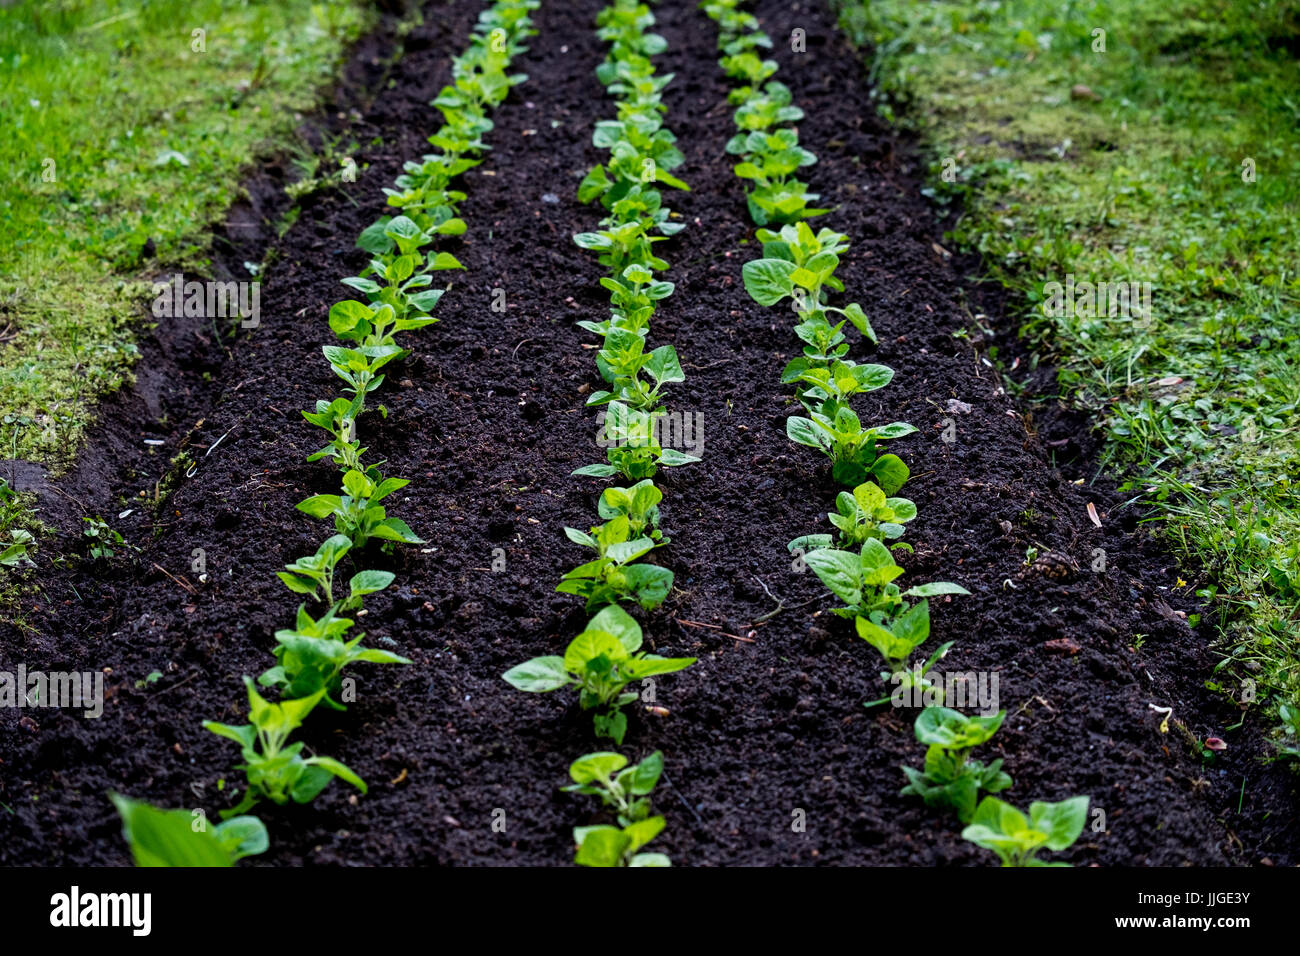 The perfect lines of the seedlings. Green garden rows. Stock Photo